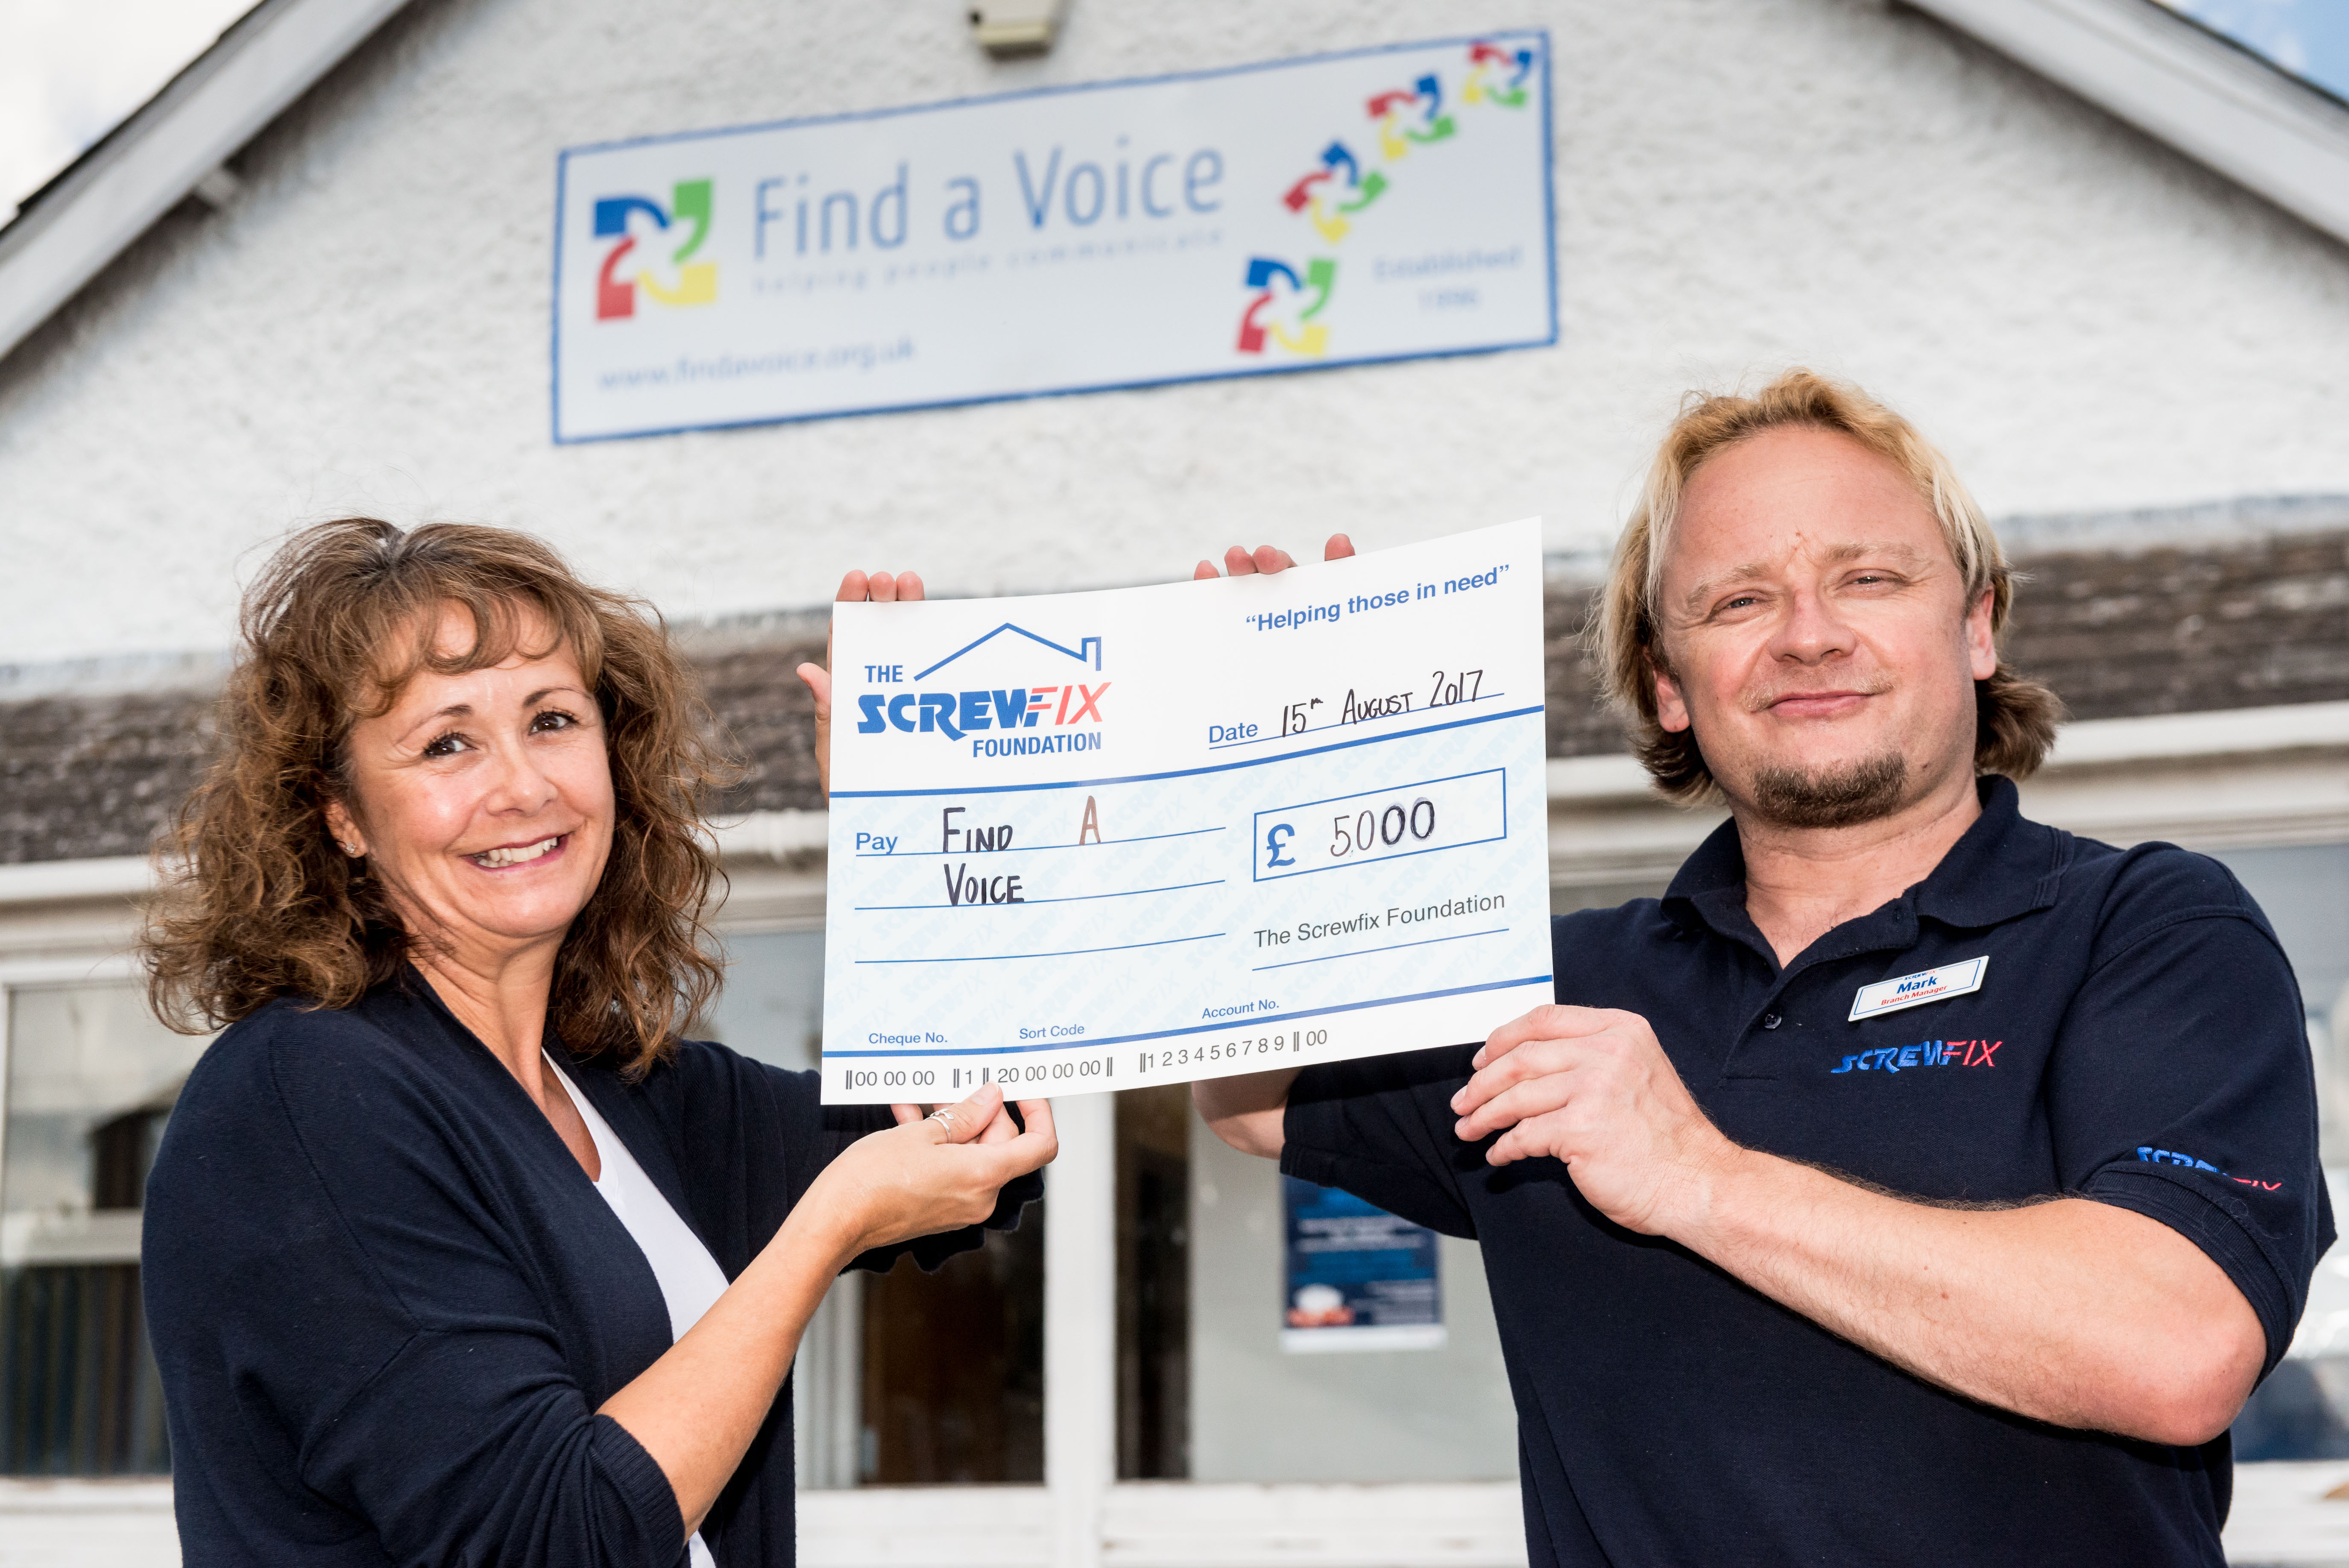 Find a Voice Gets a Helping Hand From The Screwfix Foundation